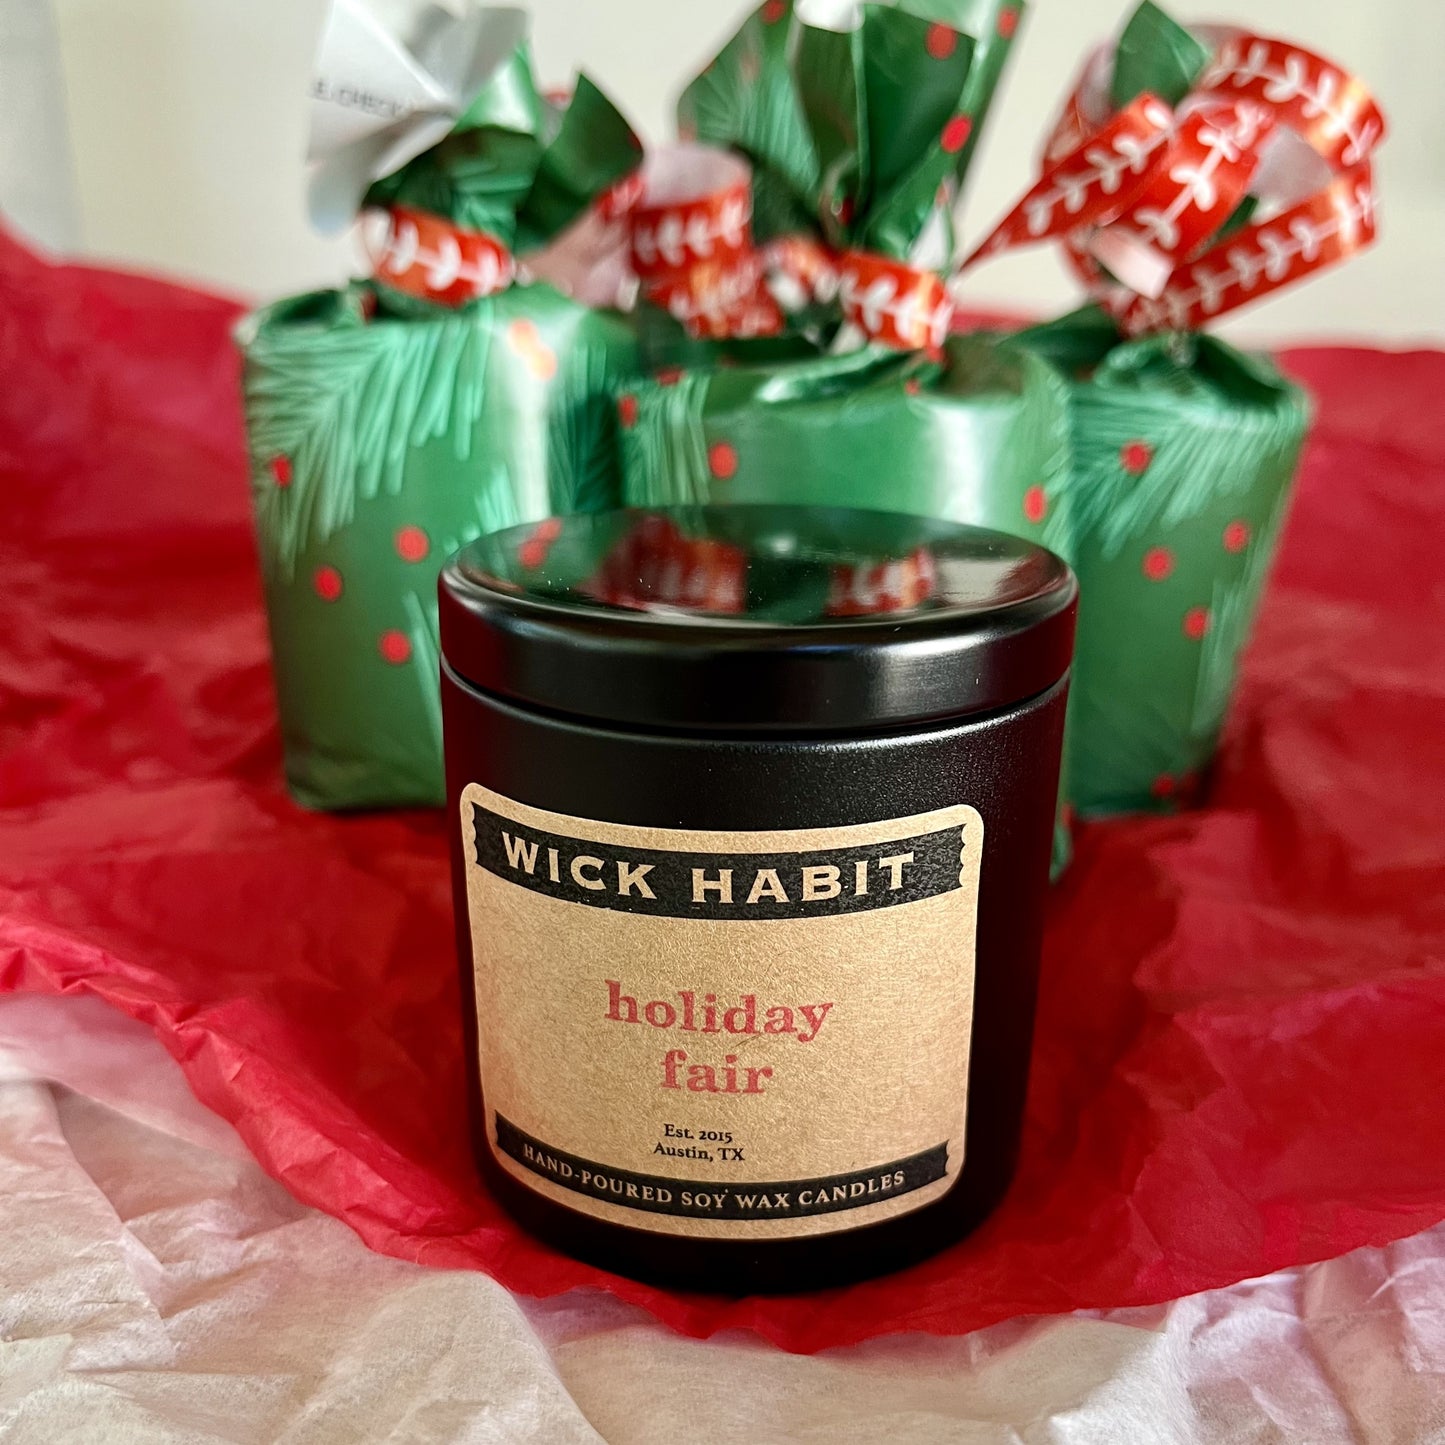 Holiday Fair Soy Wax Candle